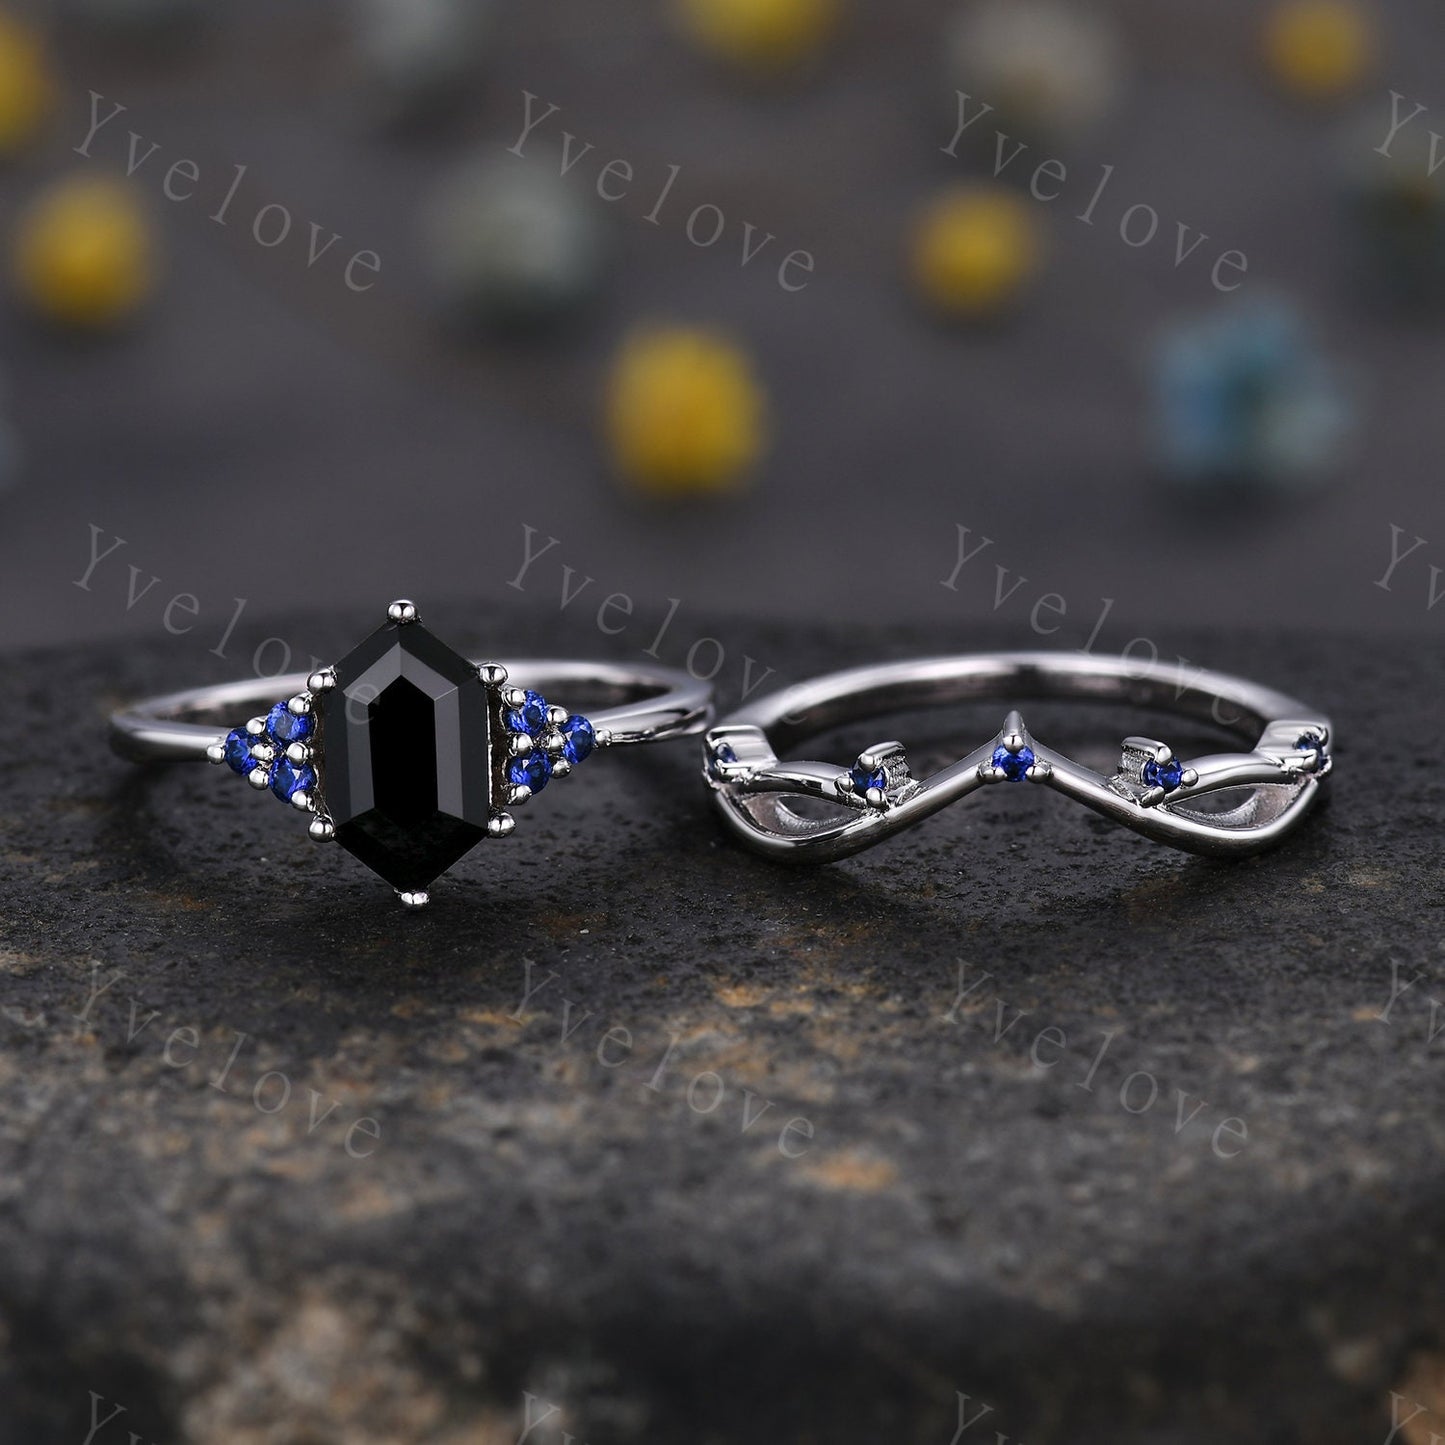 Retro hexagon Black Onyx Sapphire Ring,Vintage Silver Ring Set,Unique Black Onyx Engagement Ring,Promise Ring,Anniversary Ring Gift For Her